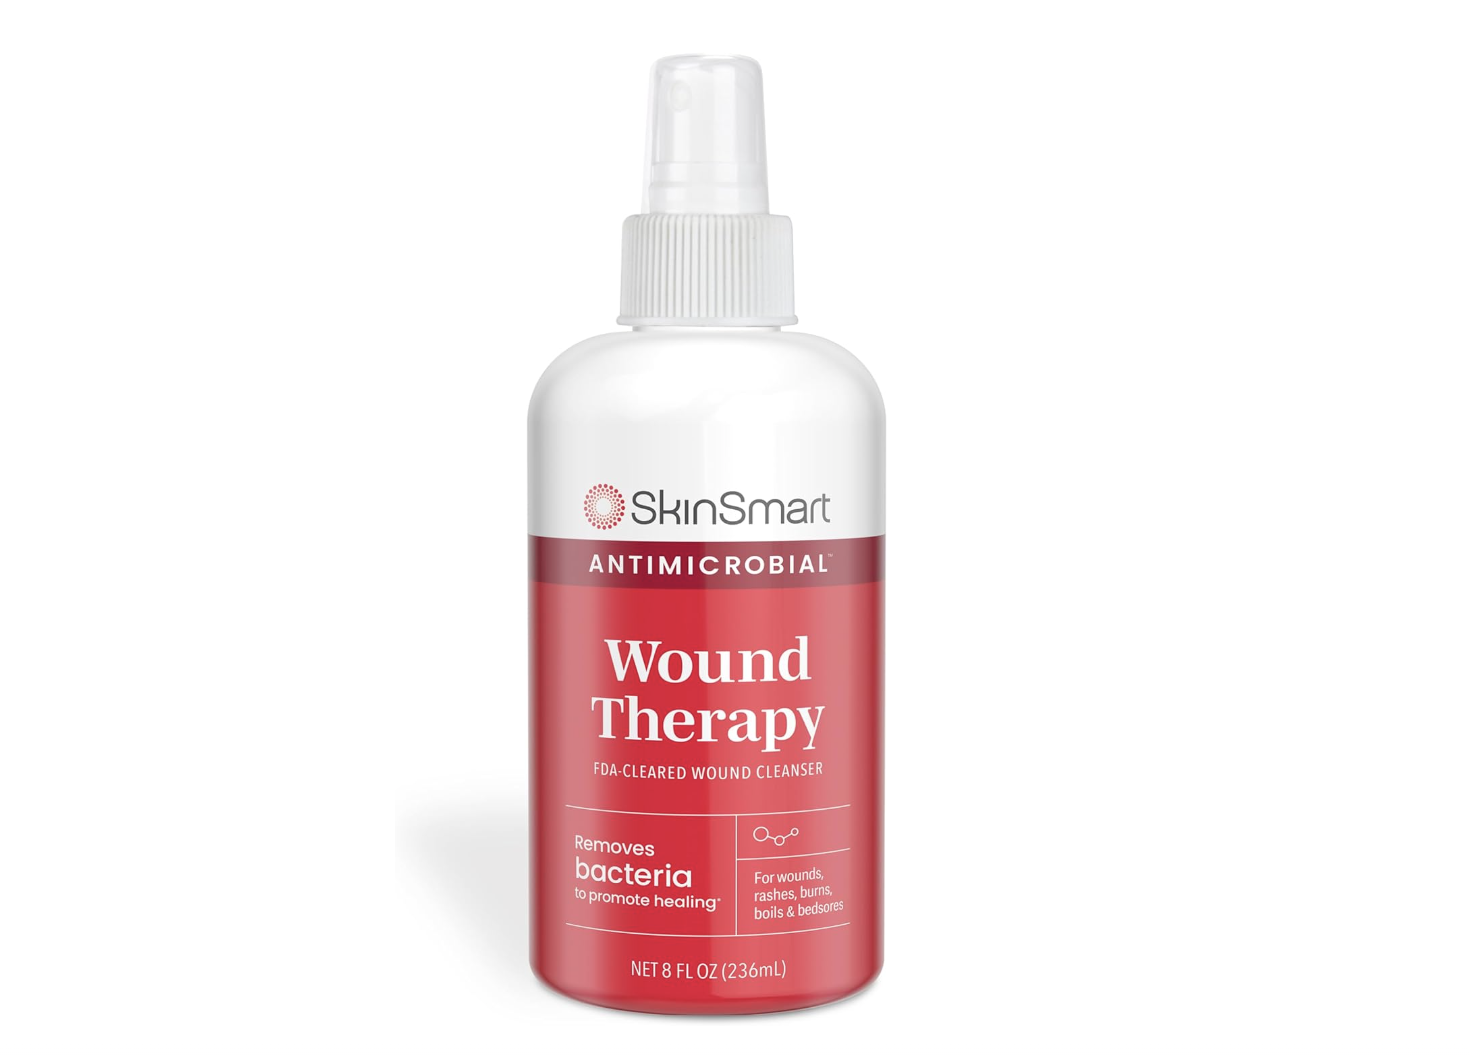 SkinSmart Antimicrobial Wound Therapy spray bottle, for skin cleansing and bacteria removal